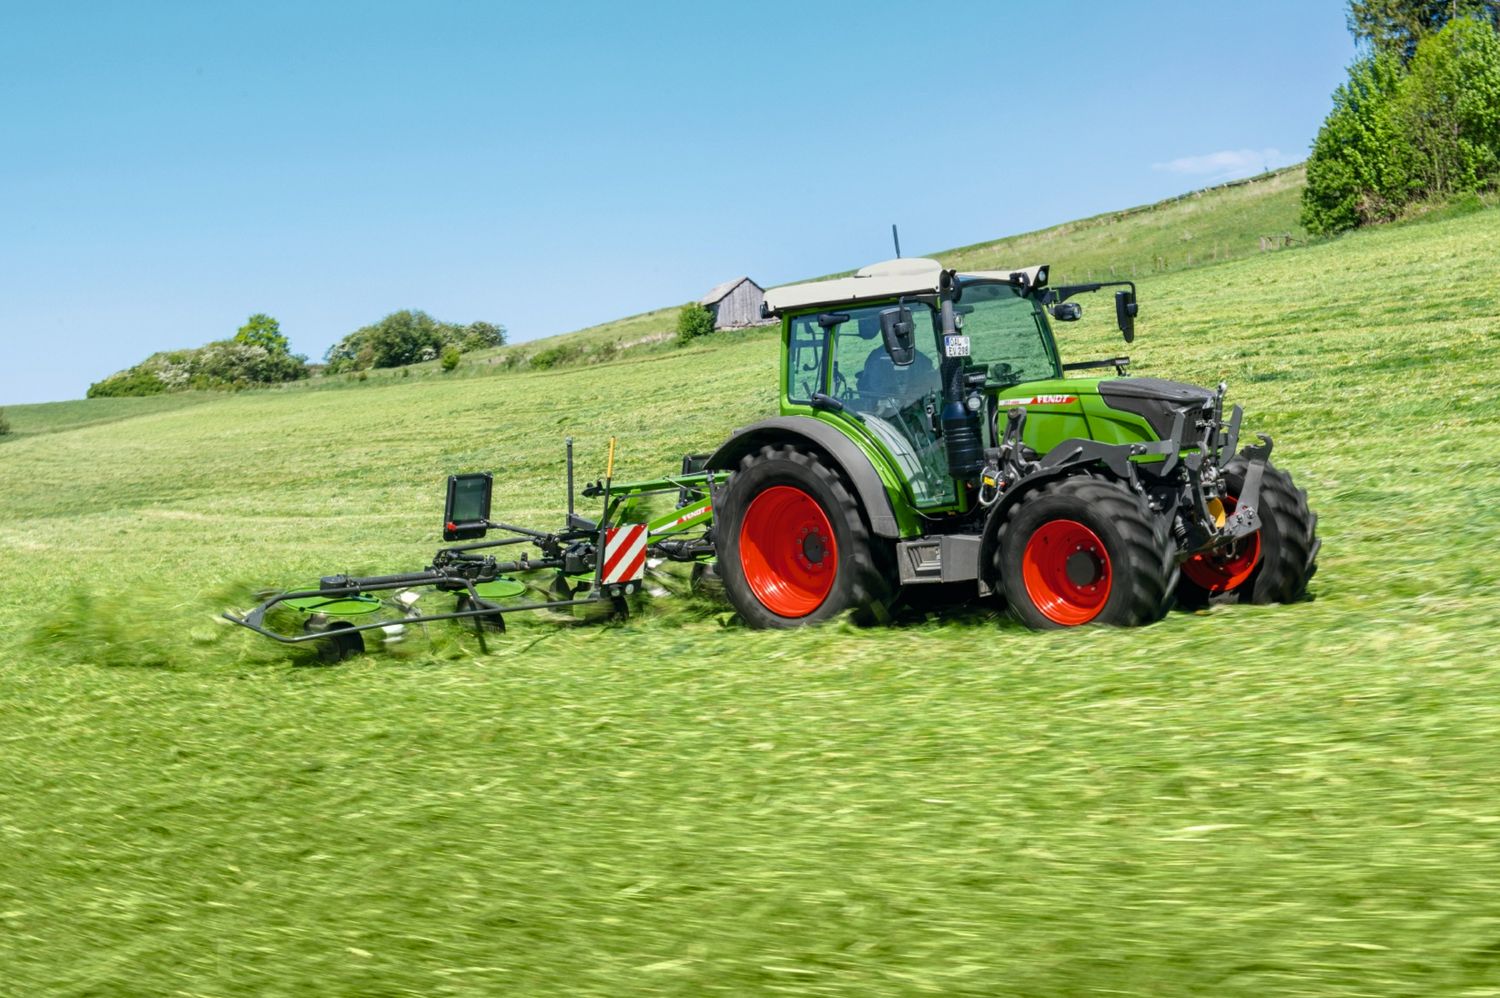 Fendt® Exhibit at Commodity Classic to Feature New Fendt 200 Vario® Tractor and Many AE50 Award-Winners